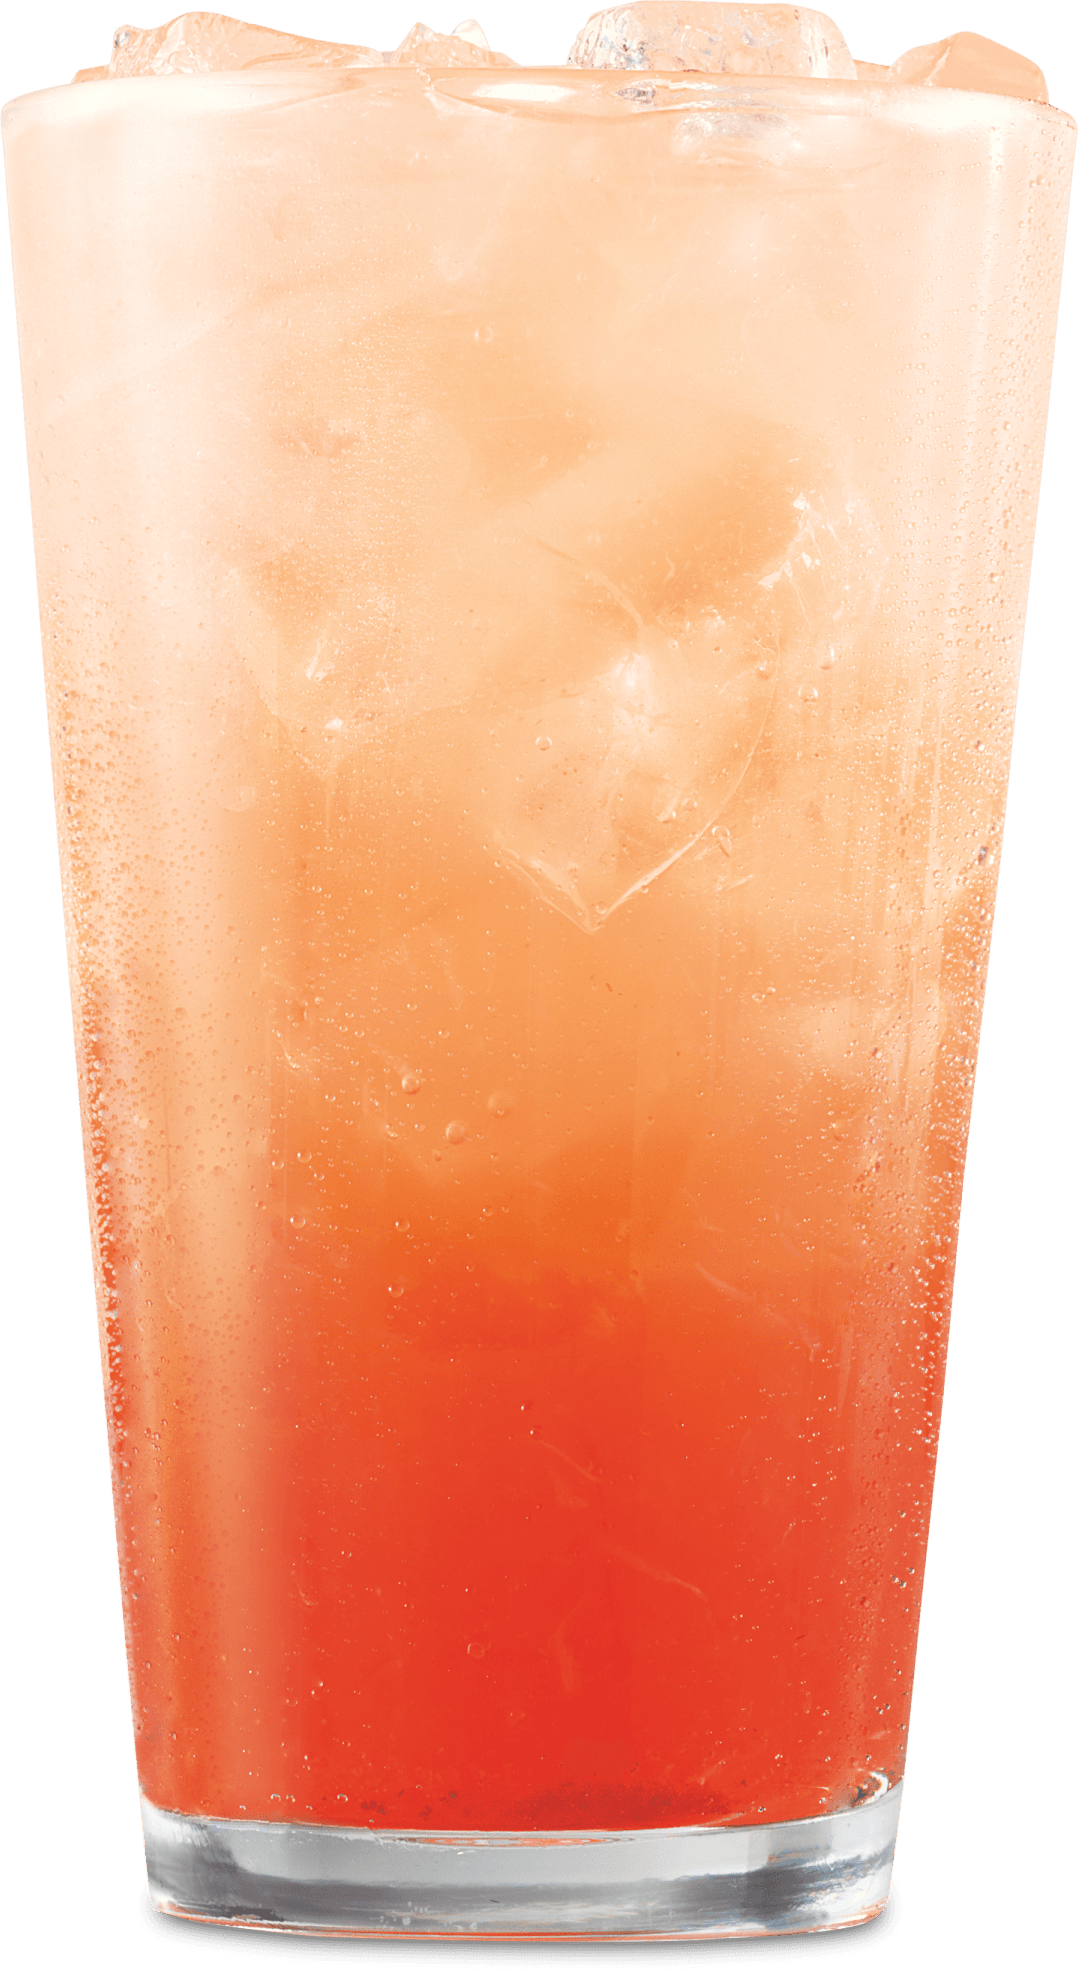 Arby's Large Strawberry Lemonade Nutrition Facts